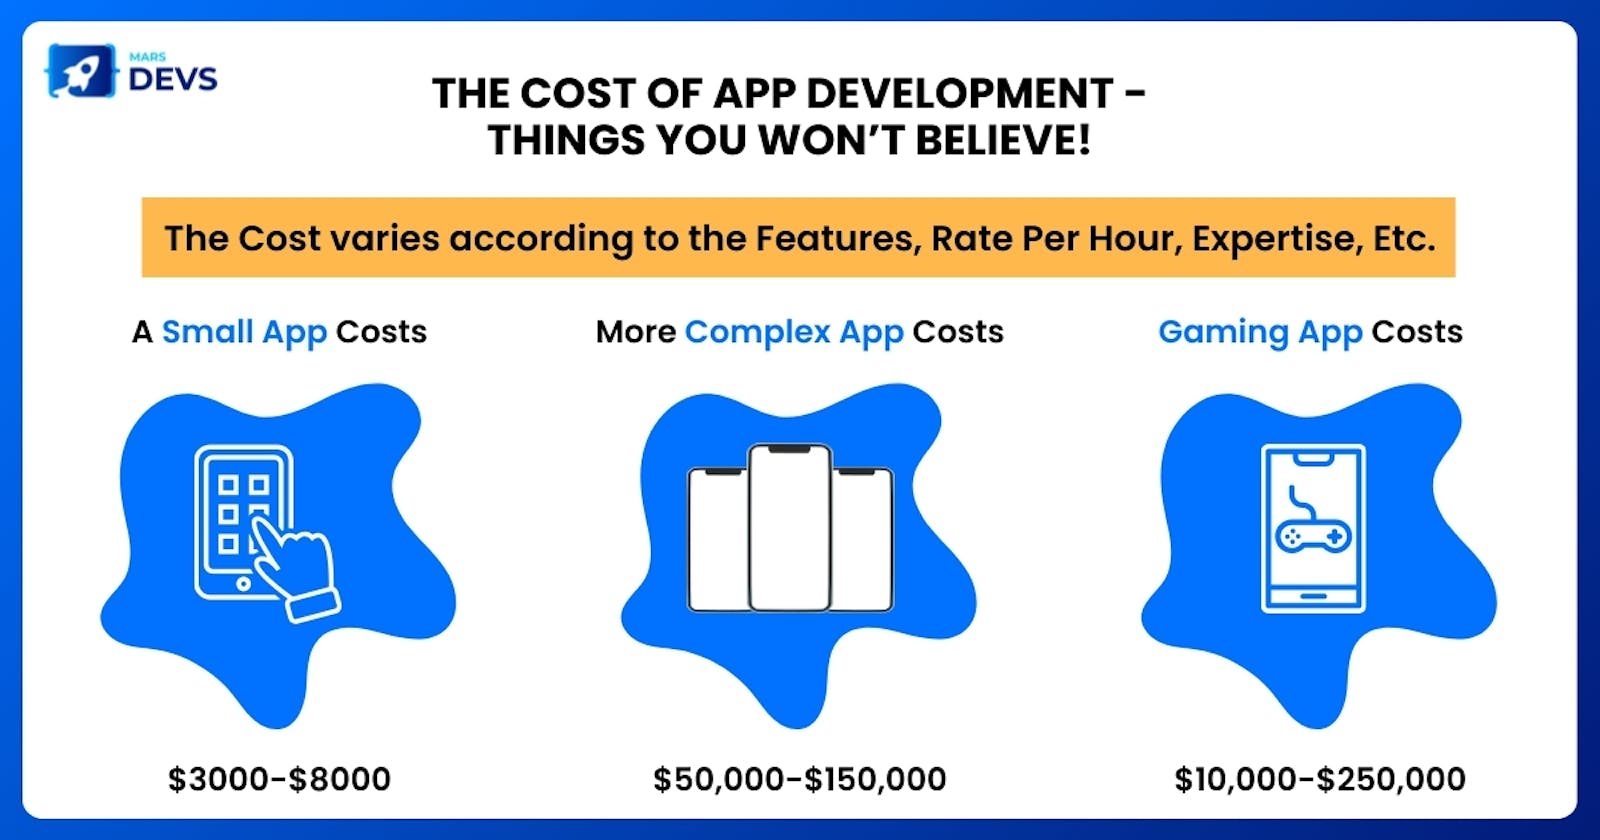 The Cost of App Development - Things You Won’t Believe!